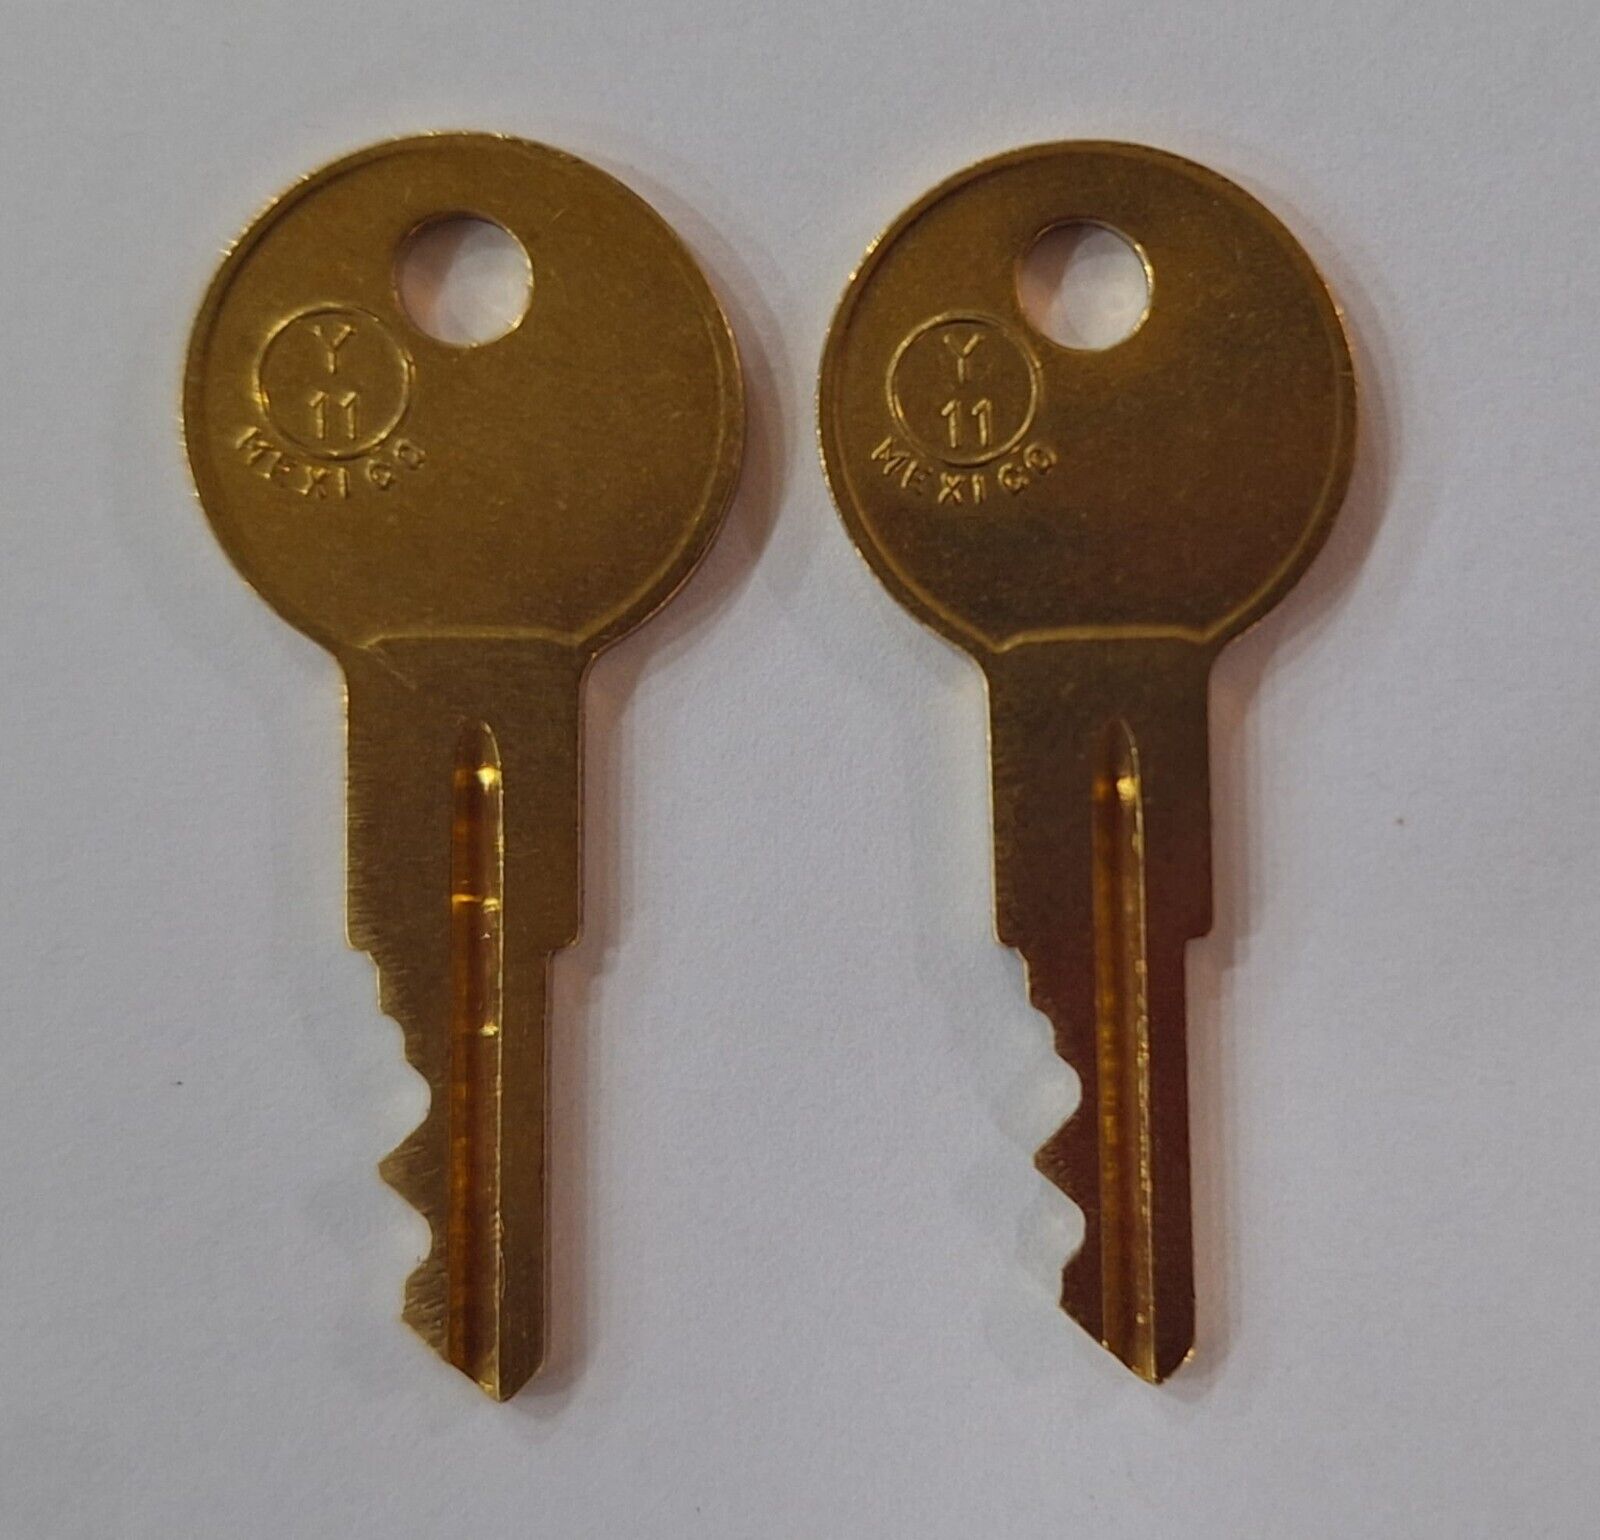 2 Replacement Keys Cut to Key Code RH22 for Craftsman / Husky / Delta Tool Box